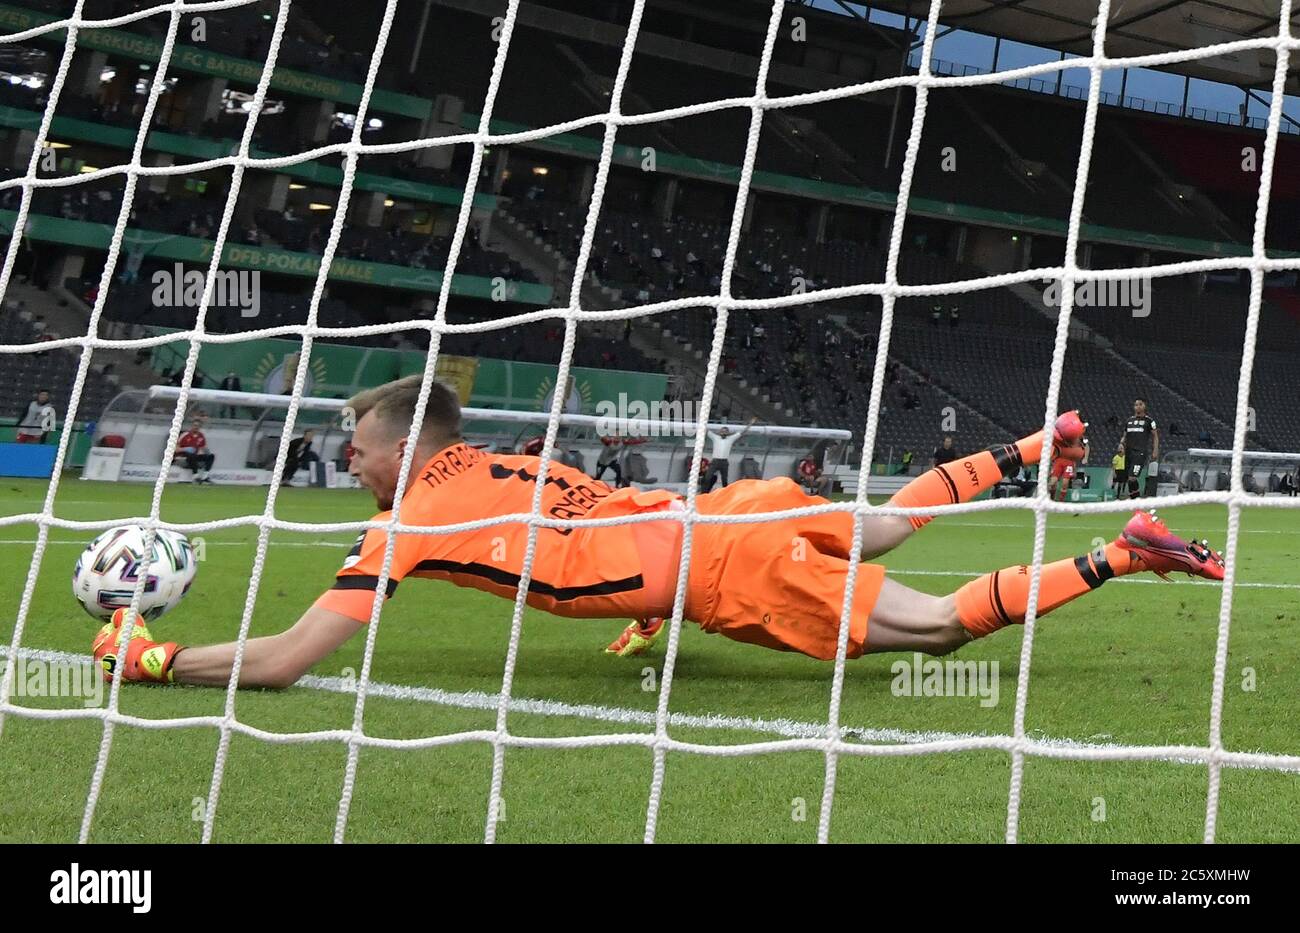 Berlin, Germany, 4 th July 2020,  Lukas HRADECKY, Lev 1 fault, mistake for 0-3 goal of Robert LEWANDOWSKI, FCB 9  at the DFB Pokal Final match  FC BAYERN MUENCHEN - BAYER 04 LEVERKUSEN 4-2  in season 2019/2020 , FCB Foto: © Peter Schatz / Alamy Live News / Kevin Voigt/Jan Huebner/Pool   - DFB REGULATIONS PROHIBIT ANY USE OF PHOTOGRAPHS as IMAGE SEQUENCES and/or QUASI-VIDEO -  National and international News-Agencies OUT Editorial Use ONLY Stock Photo